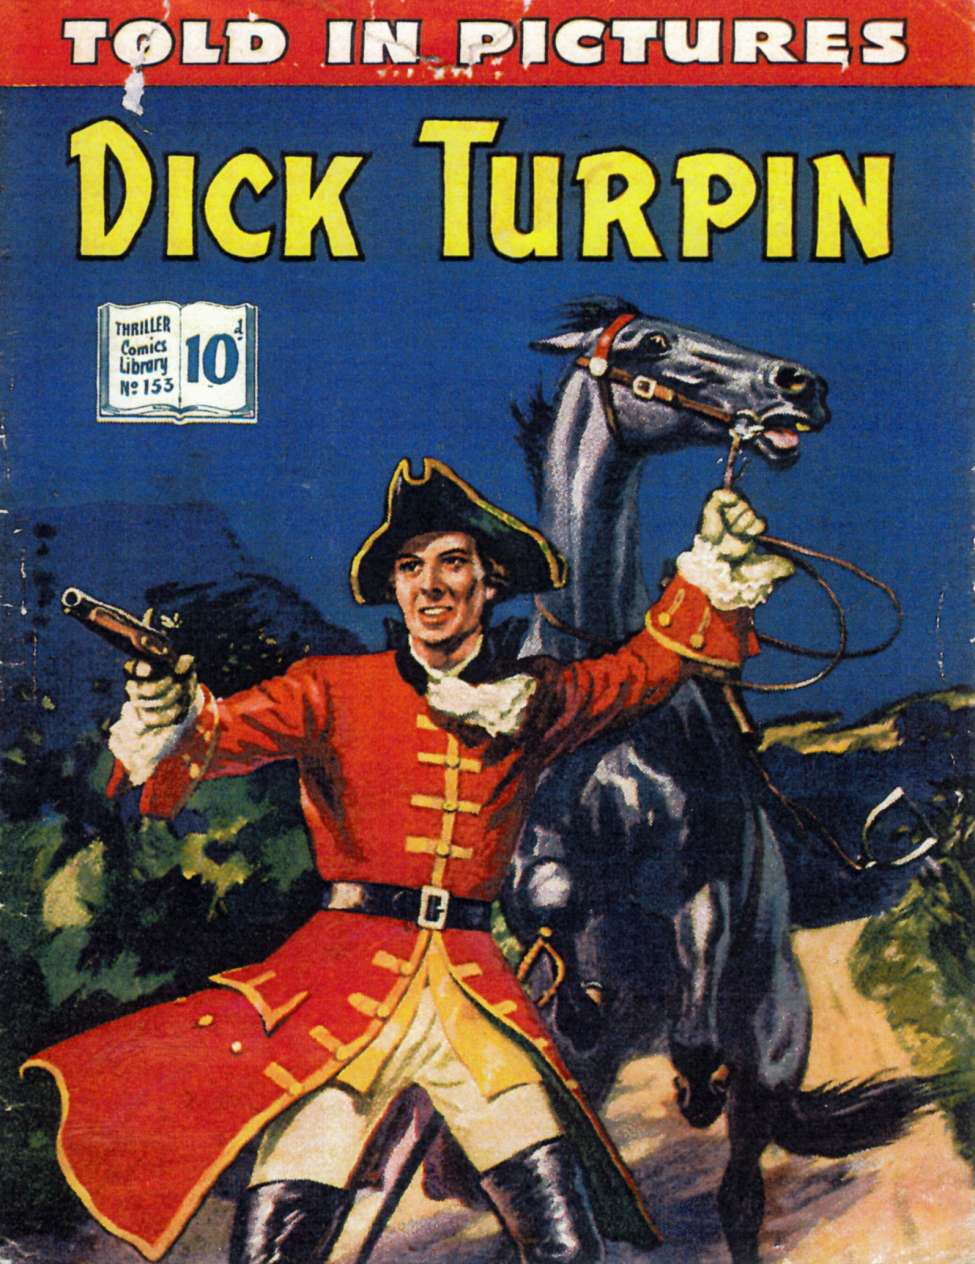 Book Cover For Thriller Comics Library 153 - Dick Turpin